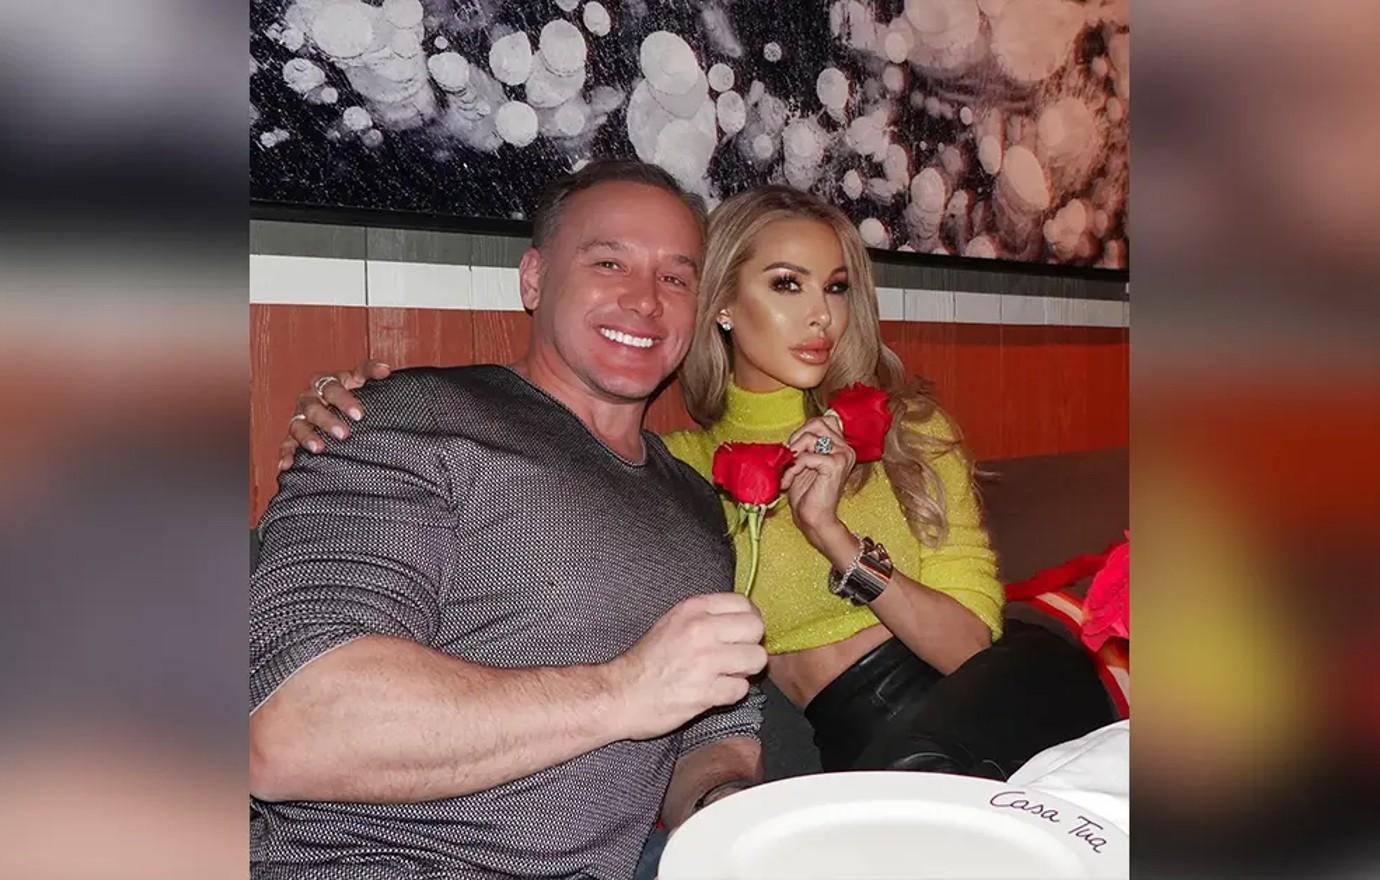 Lisa Hochsteins Ex Lenny Claims She Planted Listening Device on His pic